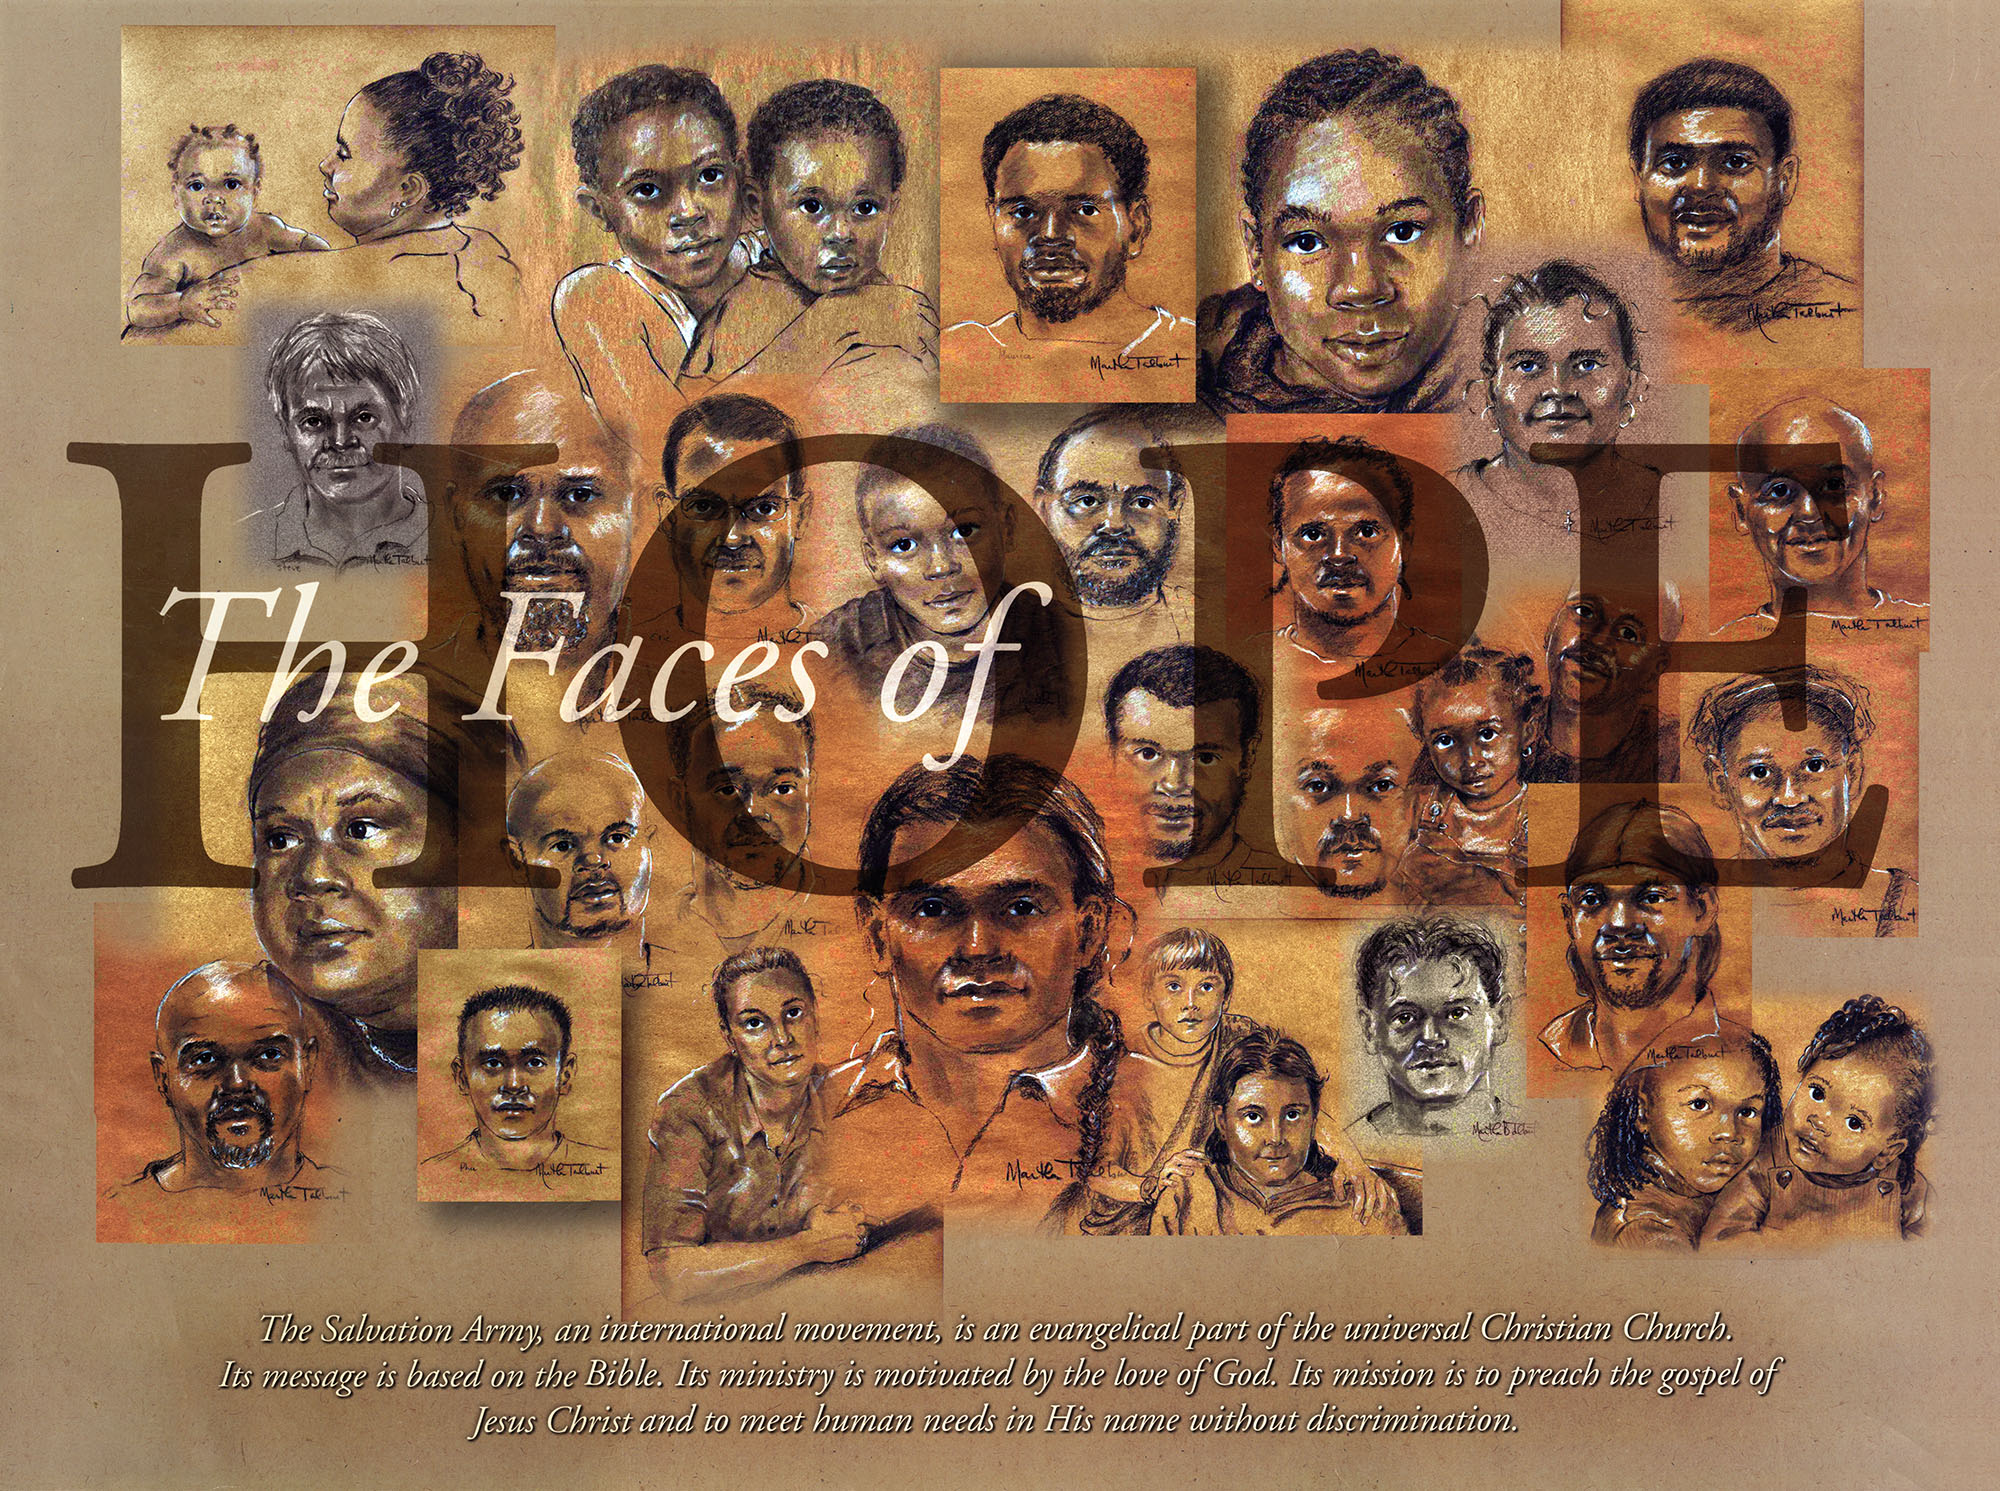 A brown toned poster featuring a couple dozen portraits of people in the local community drawn by an artist in chalk pastels. "The Faces of Hope" is superimposed on top of the portraits.